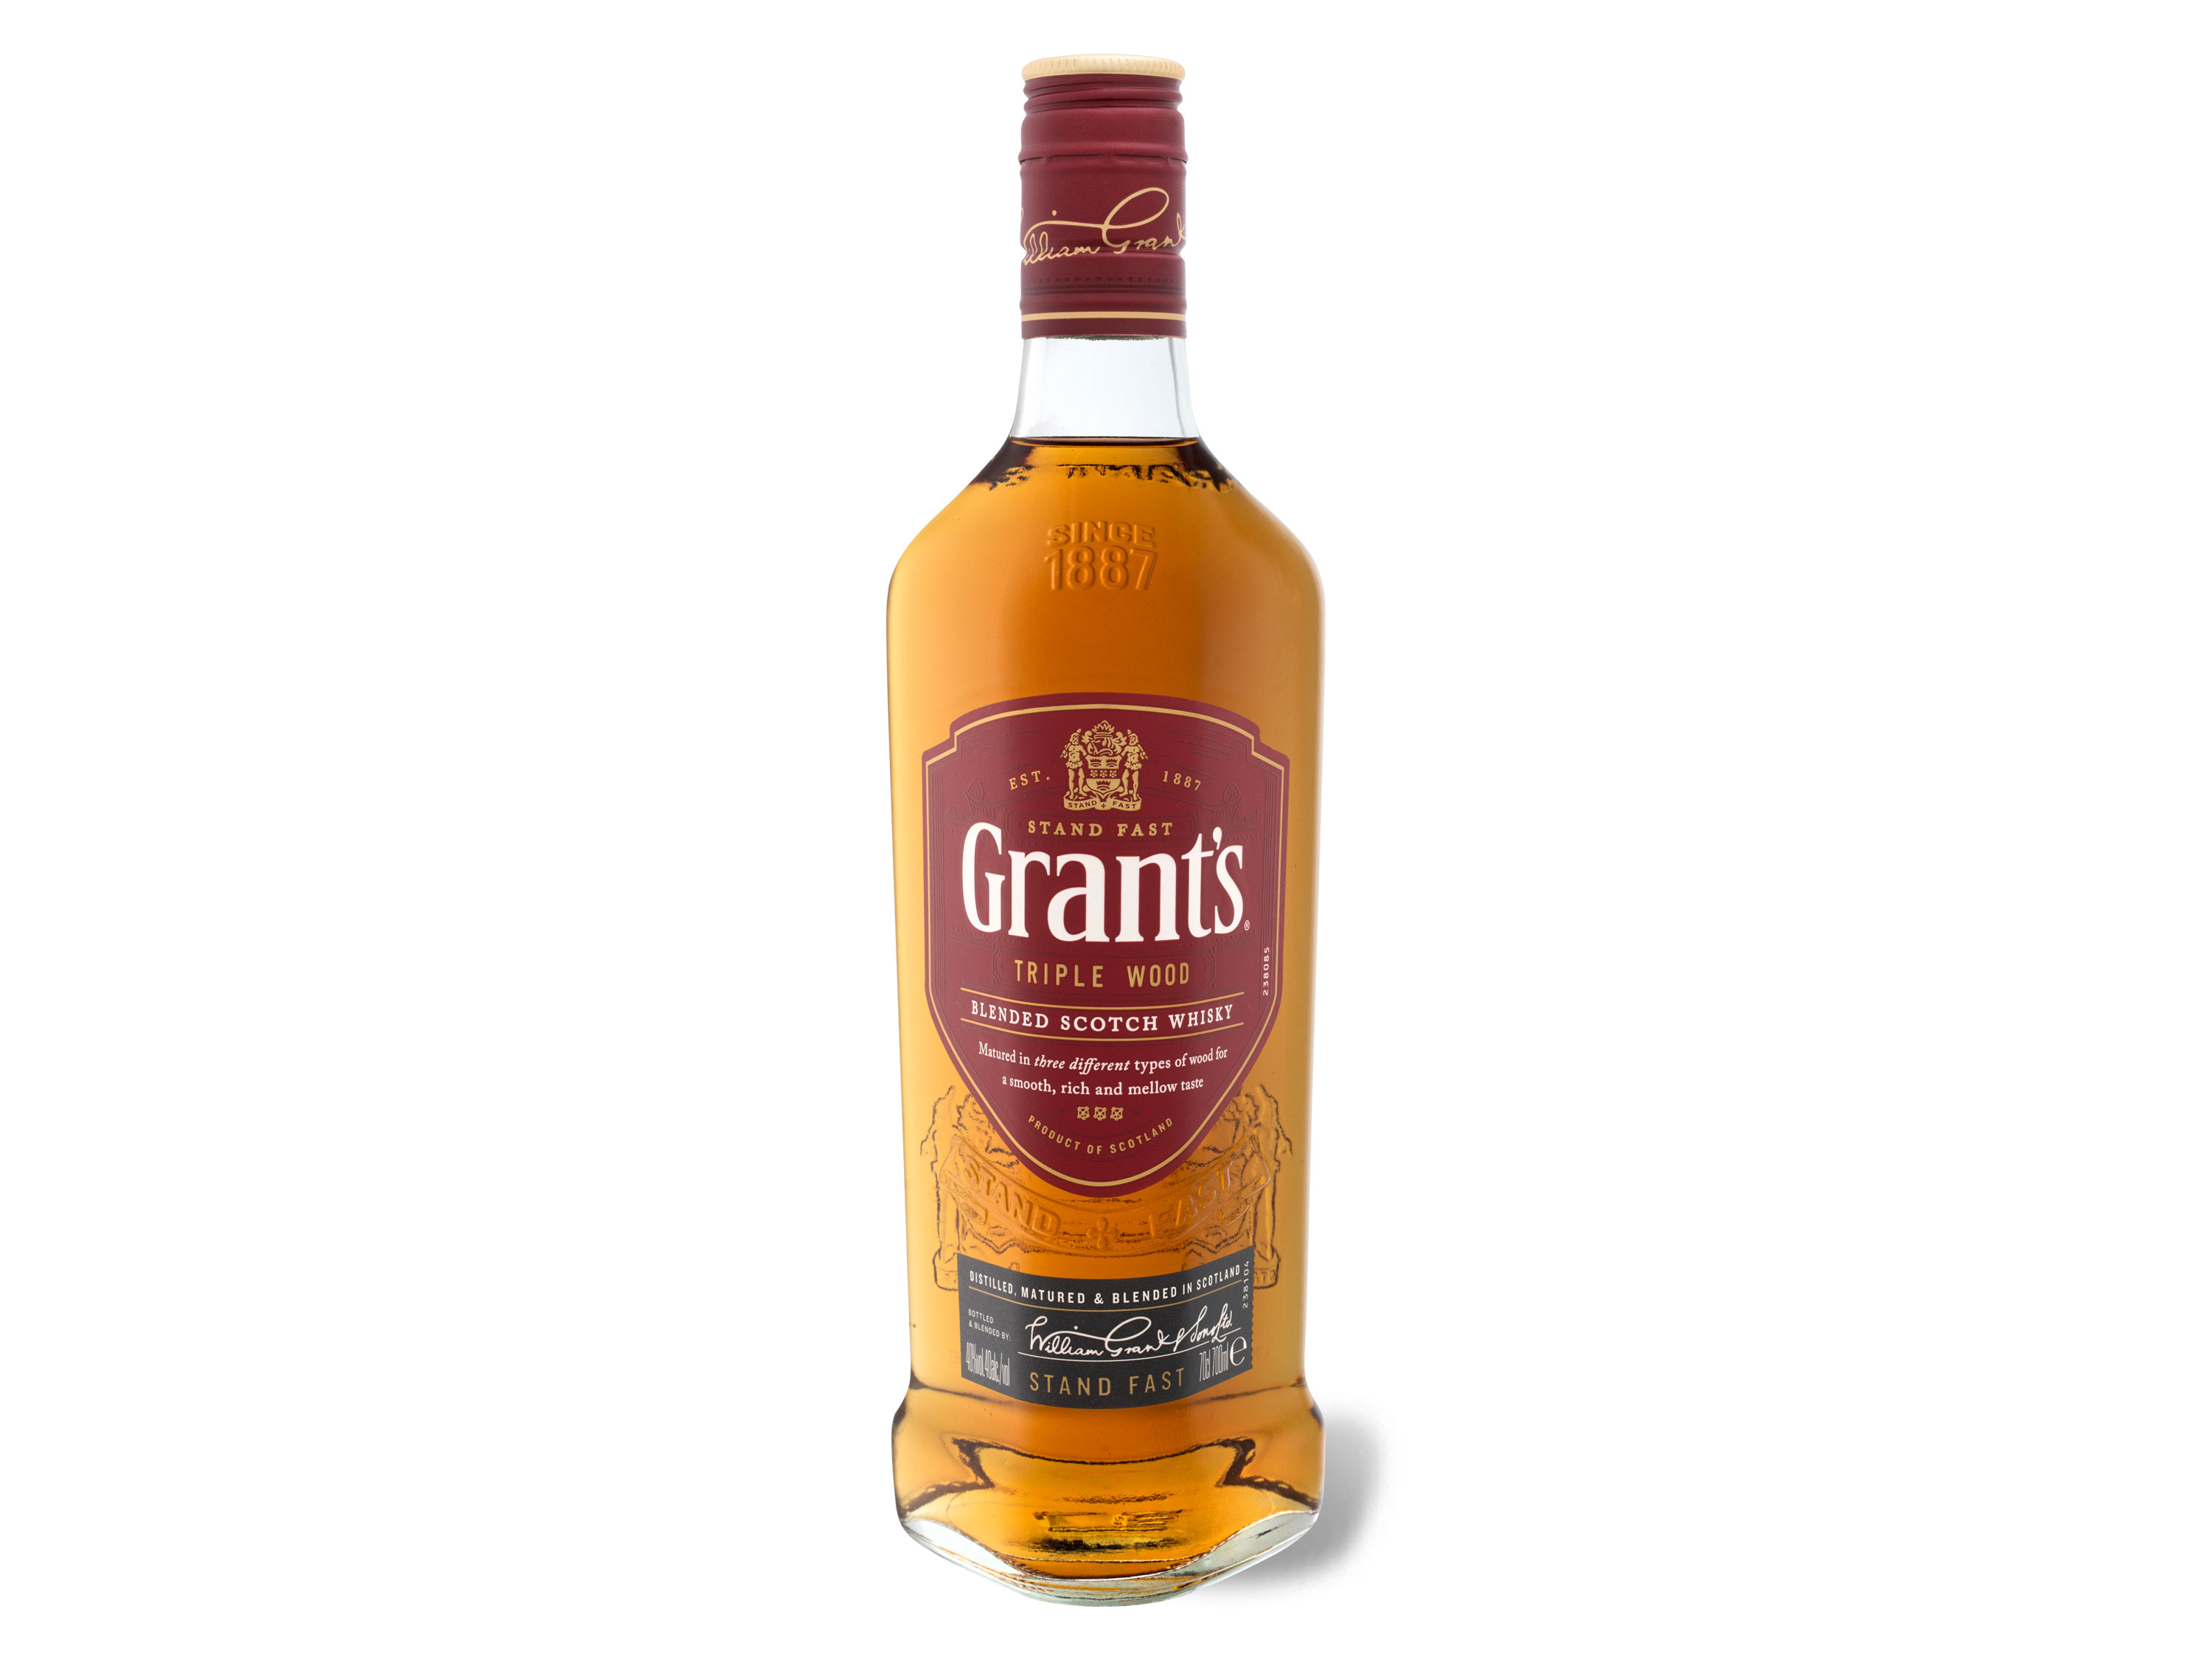 Grant’s Triple Wood Blended Scotch Whisky 40% Vol